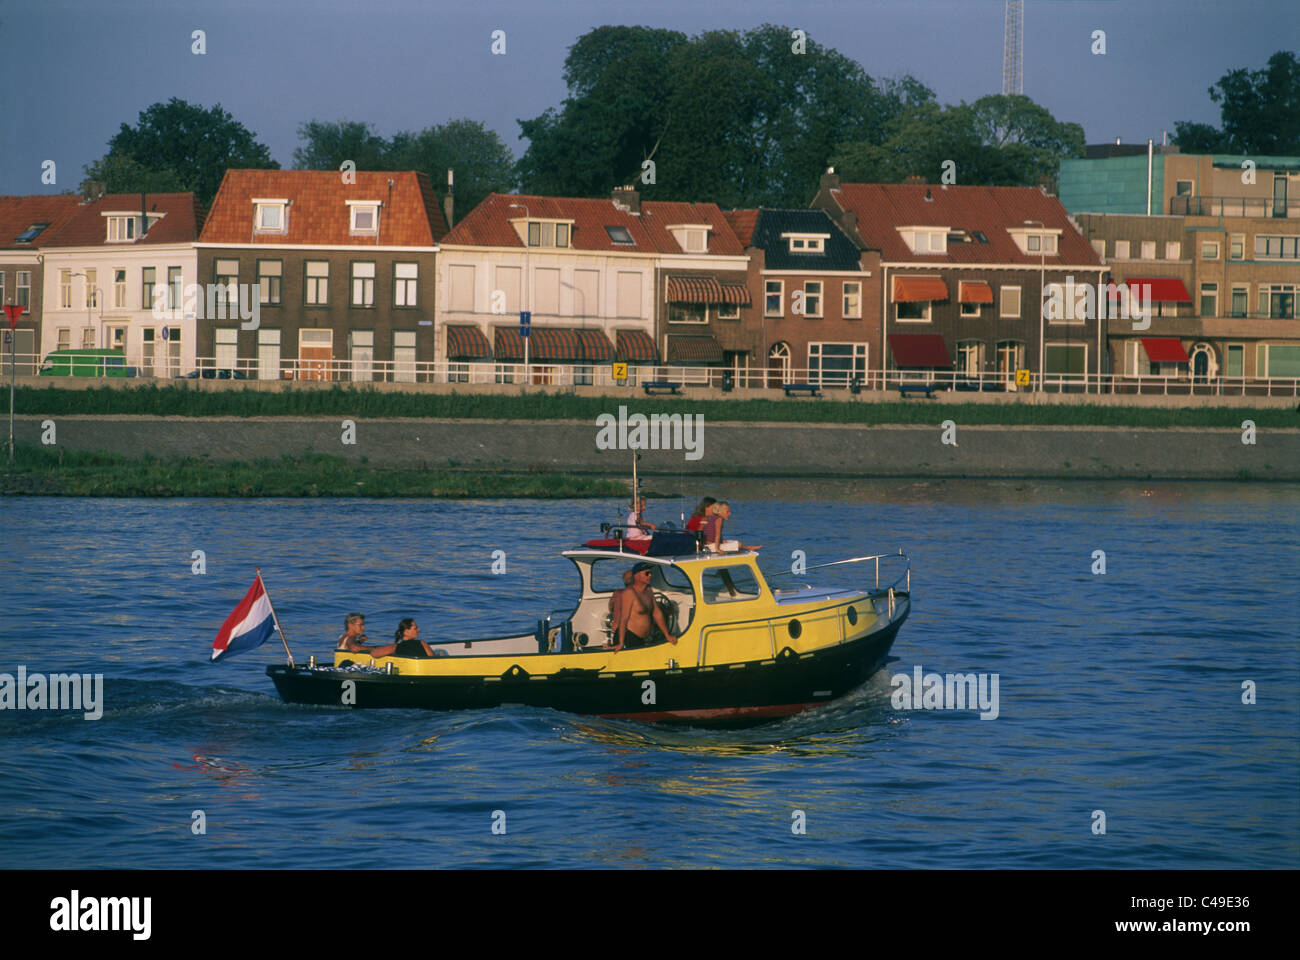 Photograph of a yello motor boat in a canal in Holland Stock Photo